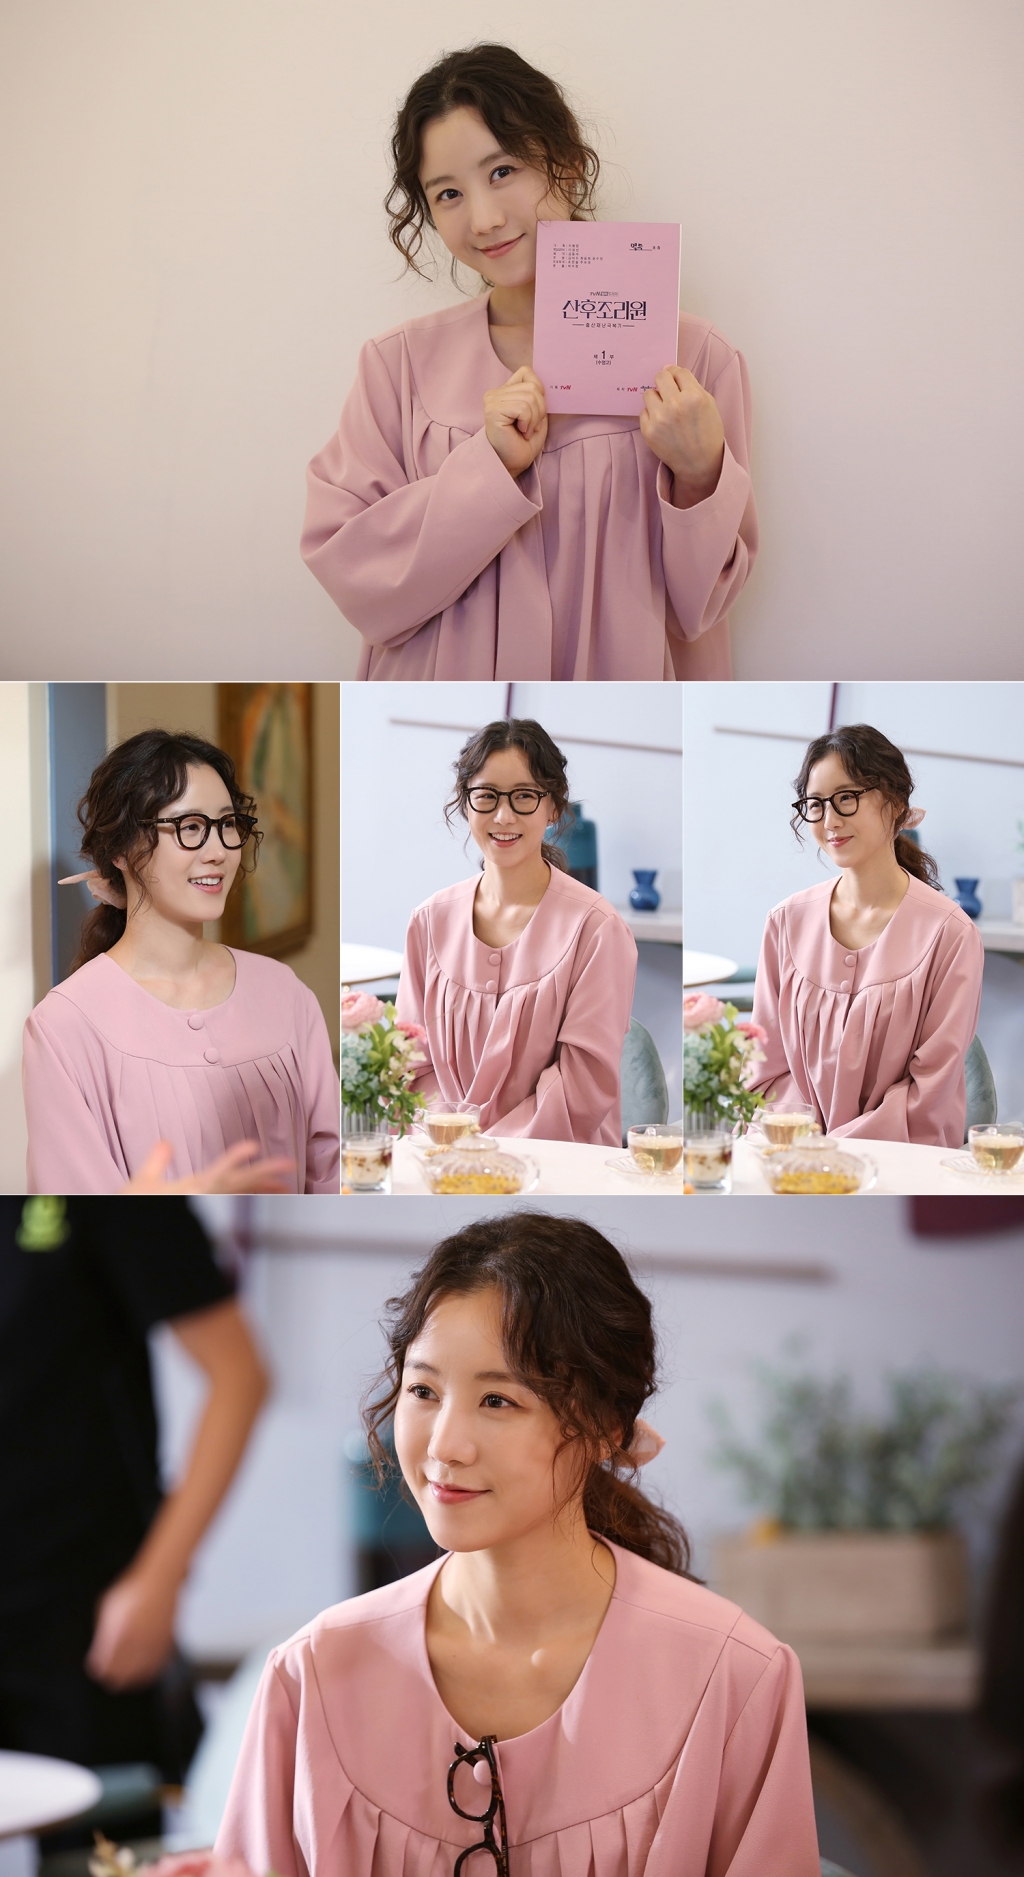 Postpartum care centers Choi Ja-hye captivated viewers with perfect character synchro rateTVNs monthly drama Postpartum care centers (directed by Park Soo-won, dramatized by Kim Ji-soo, produced by tvN and Lemon Rain, 8 episodes) is the youngest executive in the company, and the oldest mother Oh Hyun-jin (played by Eom Ji-won) in the hospital is growing up with the motivations of the cooks through the disaster-like Child Birth and the distress-grade Postpartum care centers. th noir.Choi Ja-hye played the role of a novice mother, a novice mother from Seoul National University, who has been on an elite course.Although she was the easiest mother to study, she realized that she could not study her mother as a book, and she was trying to get a special mother tutor to her love mother, Cho Eun-jung (Park Hae-sun).Choi Ja-hye received favorable reviews from viewers by taking on the role of Choi Min-hae, best friend of Min-hae, who helps her counterwind operation, suspecting the wishes of her husband Kim Jin-mook (Oh Jeong-se), in the TVN 2020 drama stage My husband has Kim Hee-sun (director Kim Jung-wook, playwright Kim Joo-hoo) which was broadcast earlier this year.This Postpartum care centers also shows off the sparkling presence in the events of the Serenity Postpartum care centers and plays a role of a new Stiller by the side of Hyunjin.In particular, the scene of arguing with the baby name such as the mother of the pee-boo Lee Si-won (Kim Yoon-jung) is broadcast in the 7th preview broadcast on the 17th, and the attention of viewers is focused on the warm and authentic acting that will be solved with the emotion of Choi Ja-hye at the center of the new event.